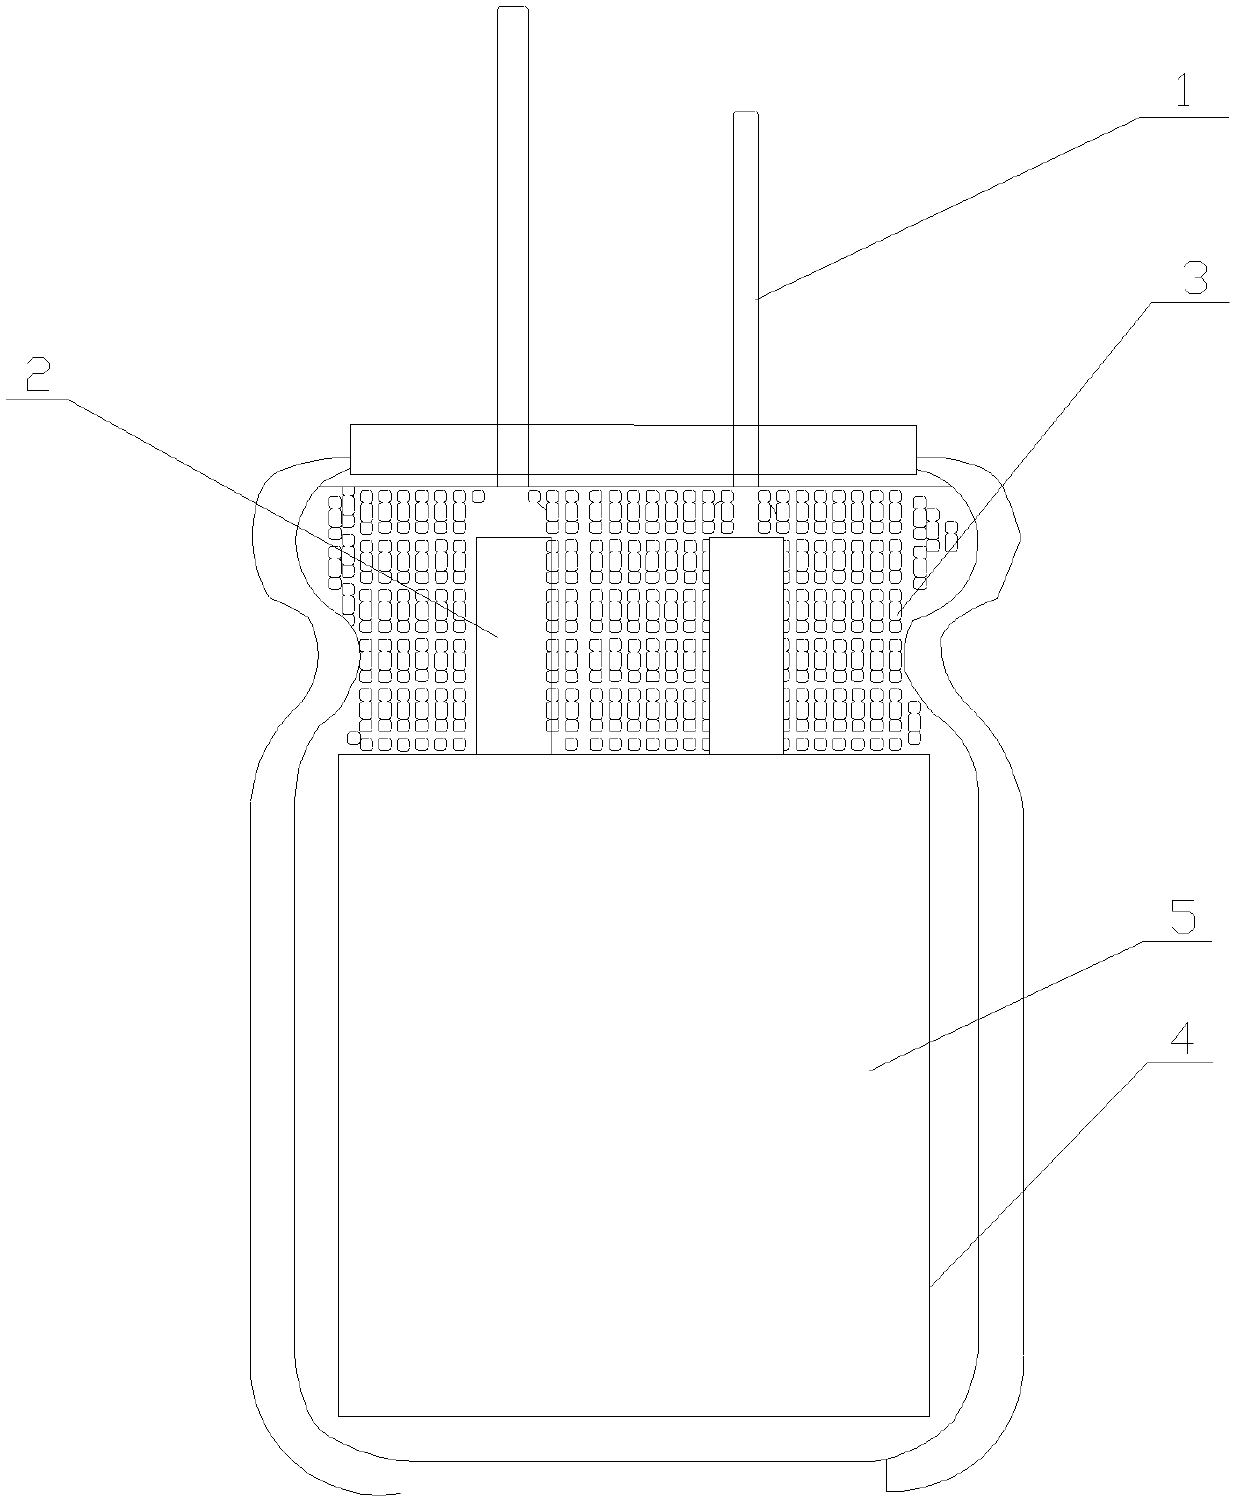 Solid electrolyte aluminium electrolytic capacitor and method for manufacturing same